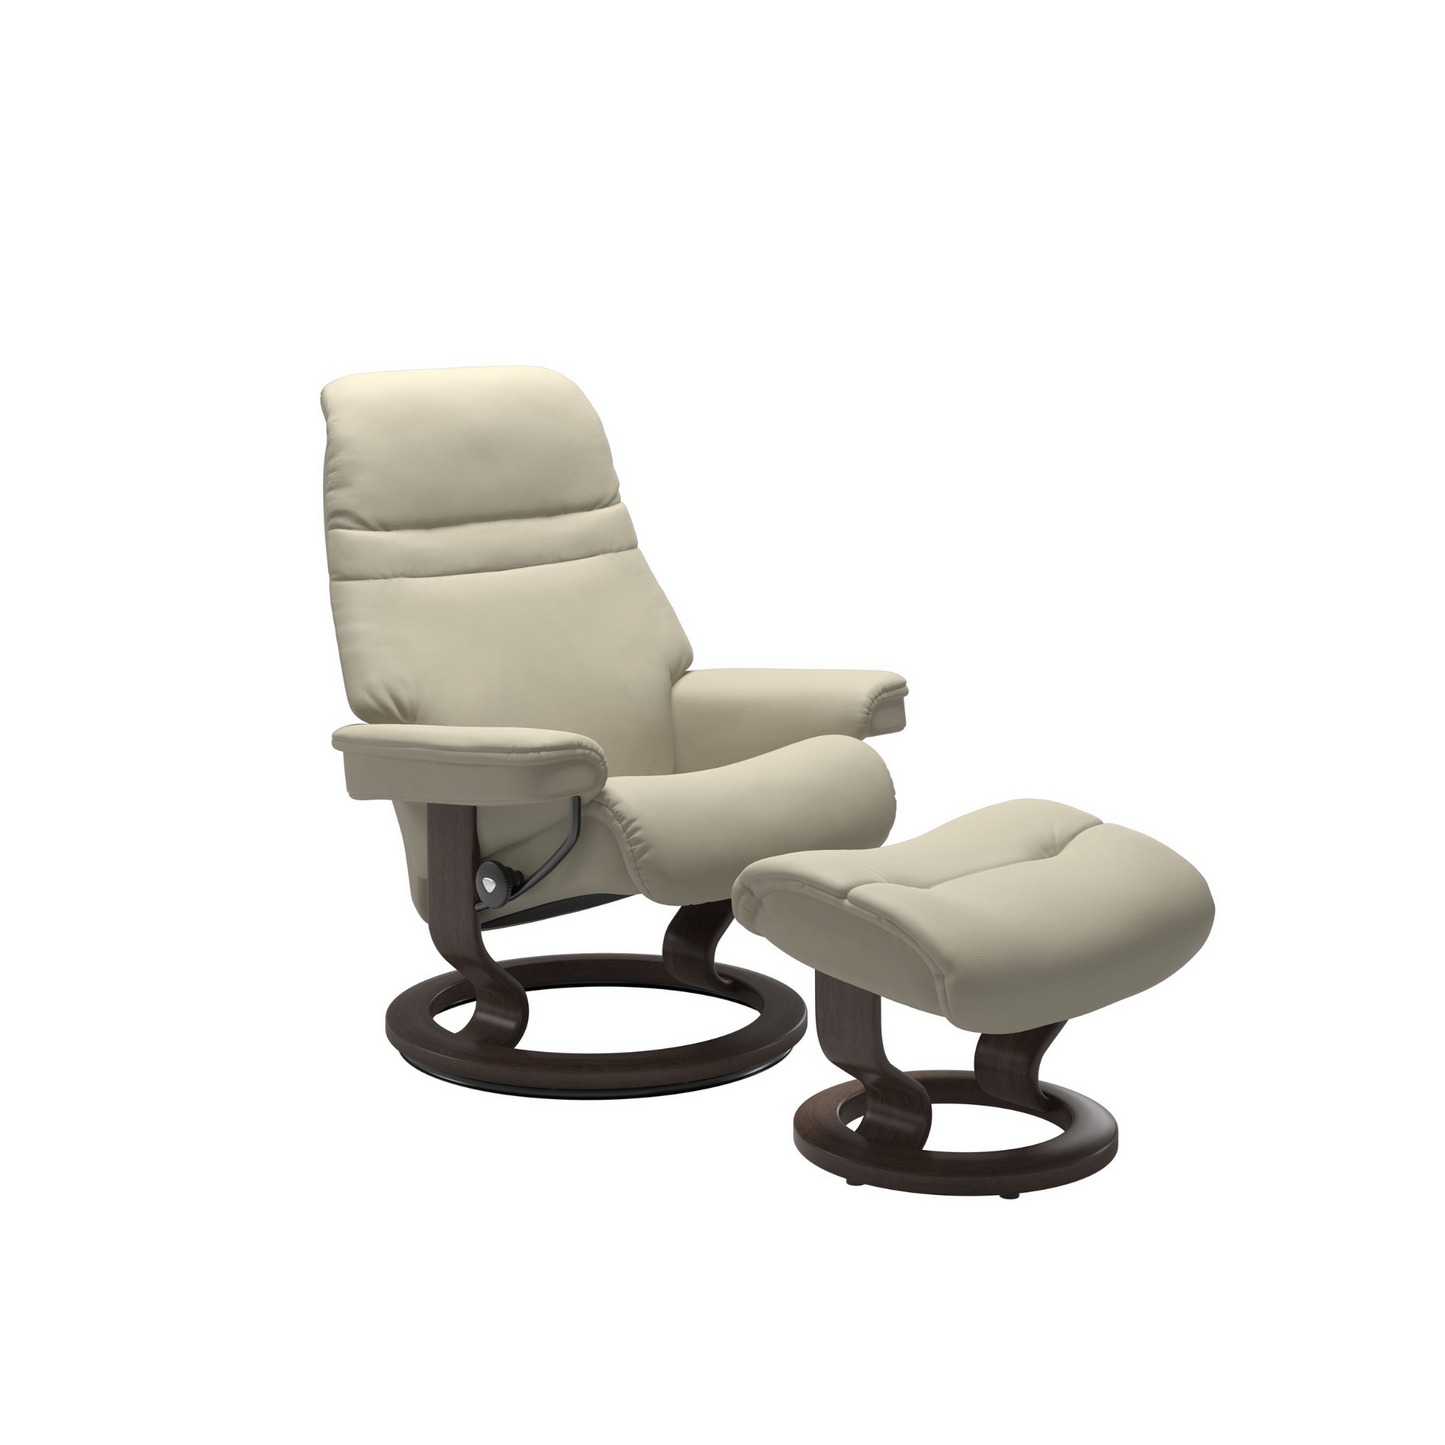 Sunrise Nordic Recliner with Ottoman